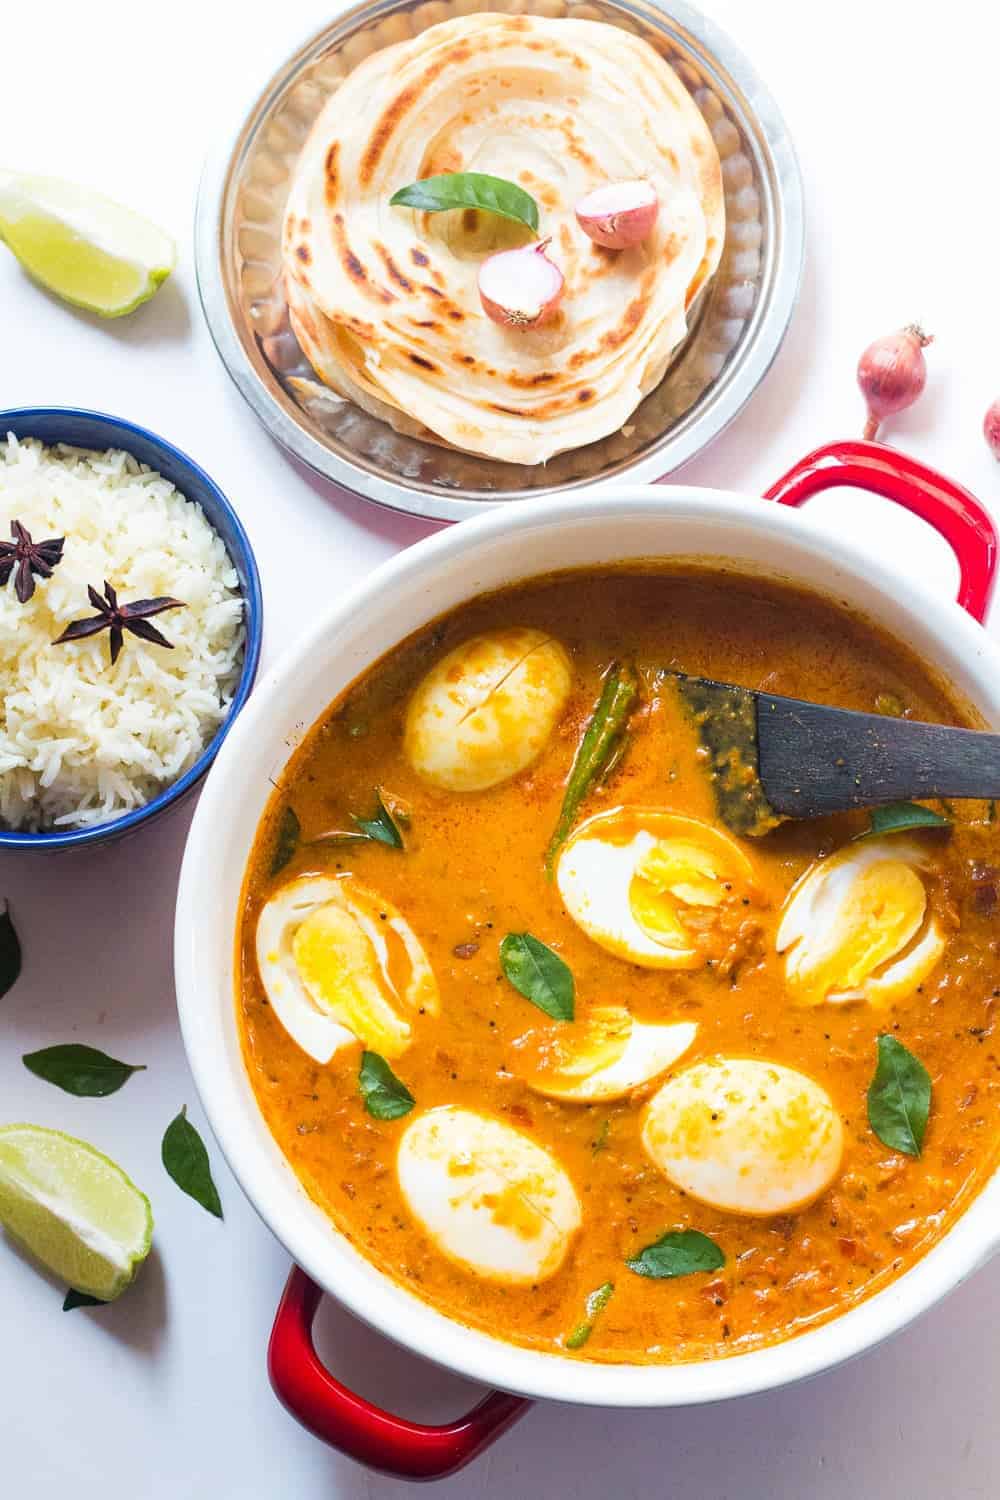 South Indian Style Egg Curry in a pot with steamed rice and malabar parathas